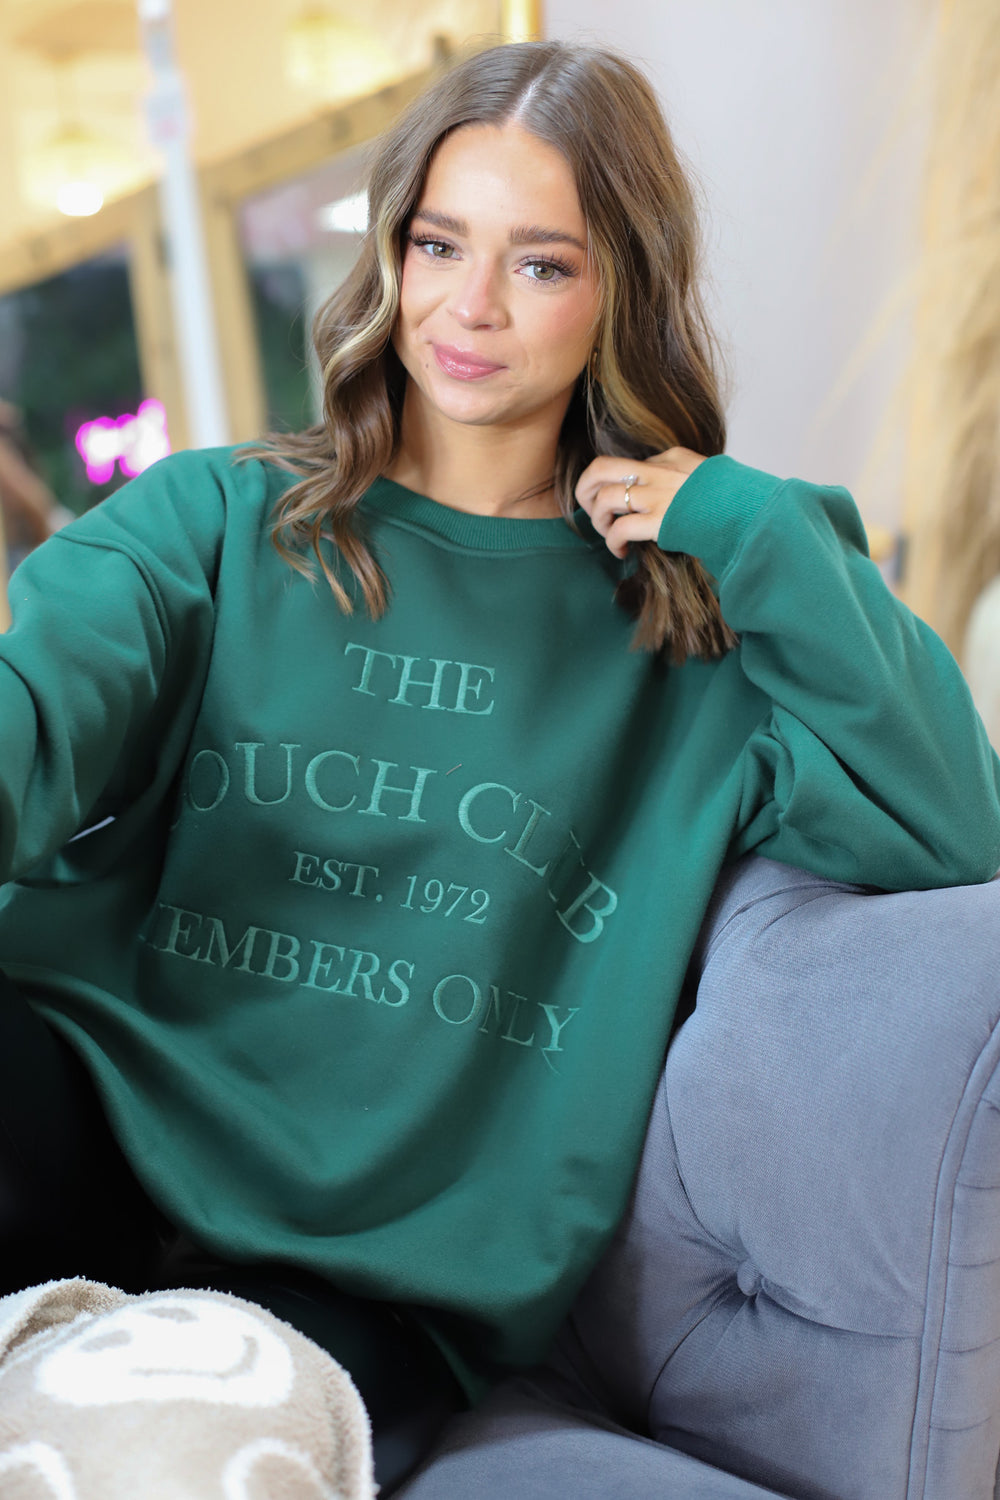 The Couch Club Sweatshirt - ShopSpoiled